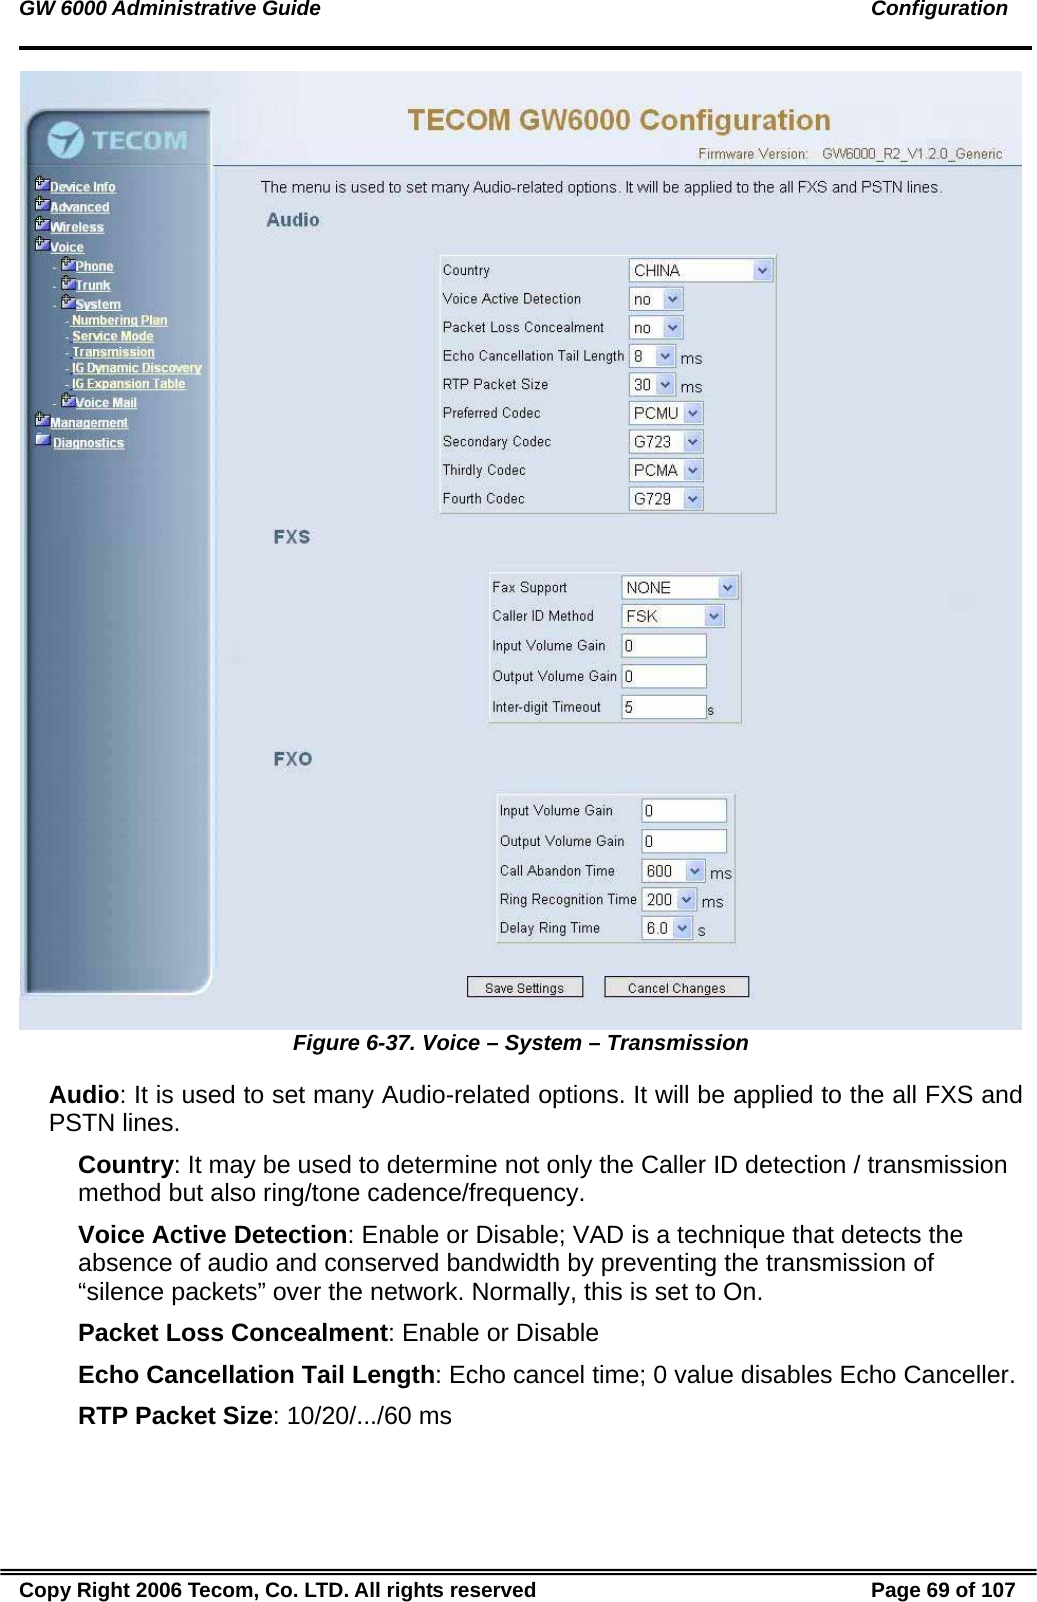 GW 6000 Administrative Guide                                                                                               Configuration  Figure 6-37. Voice – System – Transmission Audio: It is used to set many Audio-related options. It will be applied to the all FXS and PSTN lines. Country: It may be used to determine not only the Caller ID detection / transmission method but also ring/tone cadence/frequency. Voice Active Detection: Enable or Disable; VAD is a technique that detects the absence of audio and conserved bandwidth by preventing the transmission of “silence packets” over the network. Normally, this is set to On. Packet Loss Concealment: Enable or Disable Echo Cancellation Tail Length: Echo cancel time; 0 value disables Echo Canceller. RTP Packet Size: 10/20/.../60 ms Copy Right 2006 Tecom, Co. LTD. All rights reserved  Page 69 of 107 